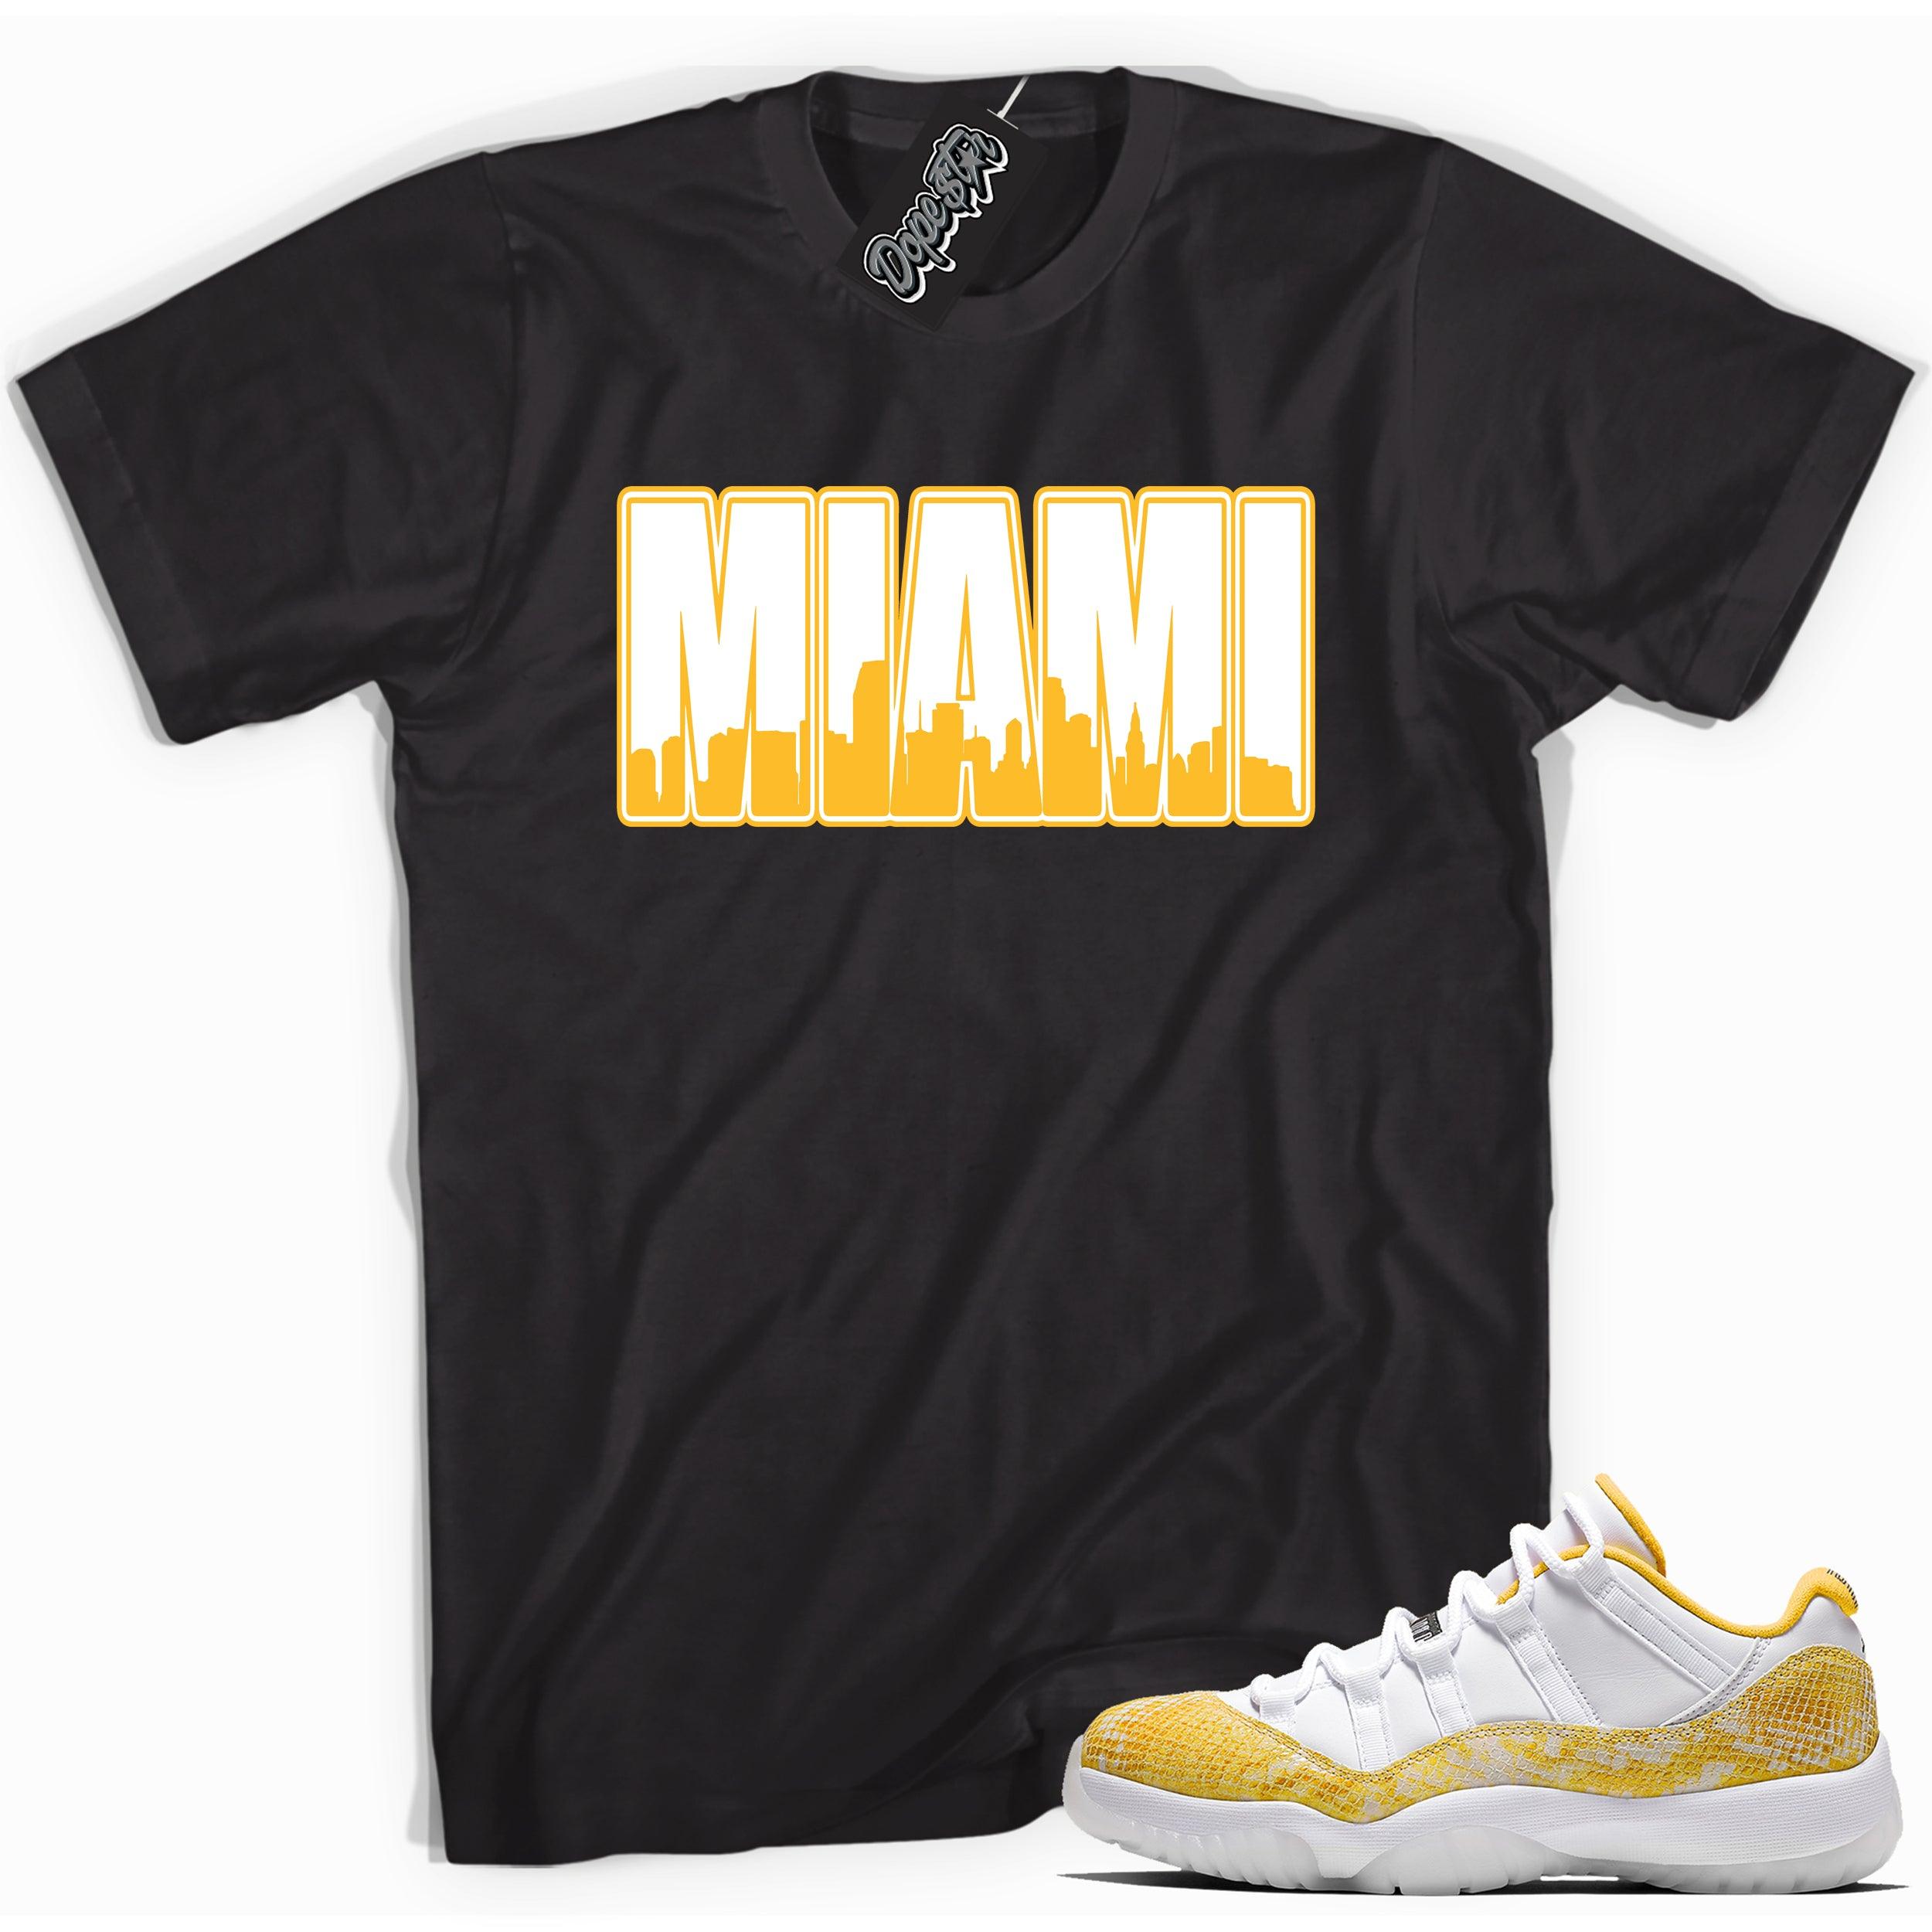 Cool black graphic tee with 'miami' print, that perfectly matches  Air Jordan 11 Low Yellow Snakeskin sneakers